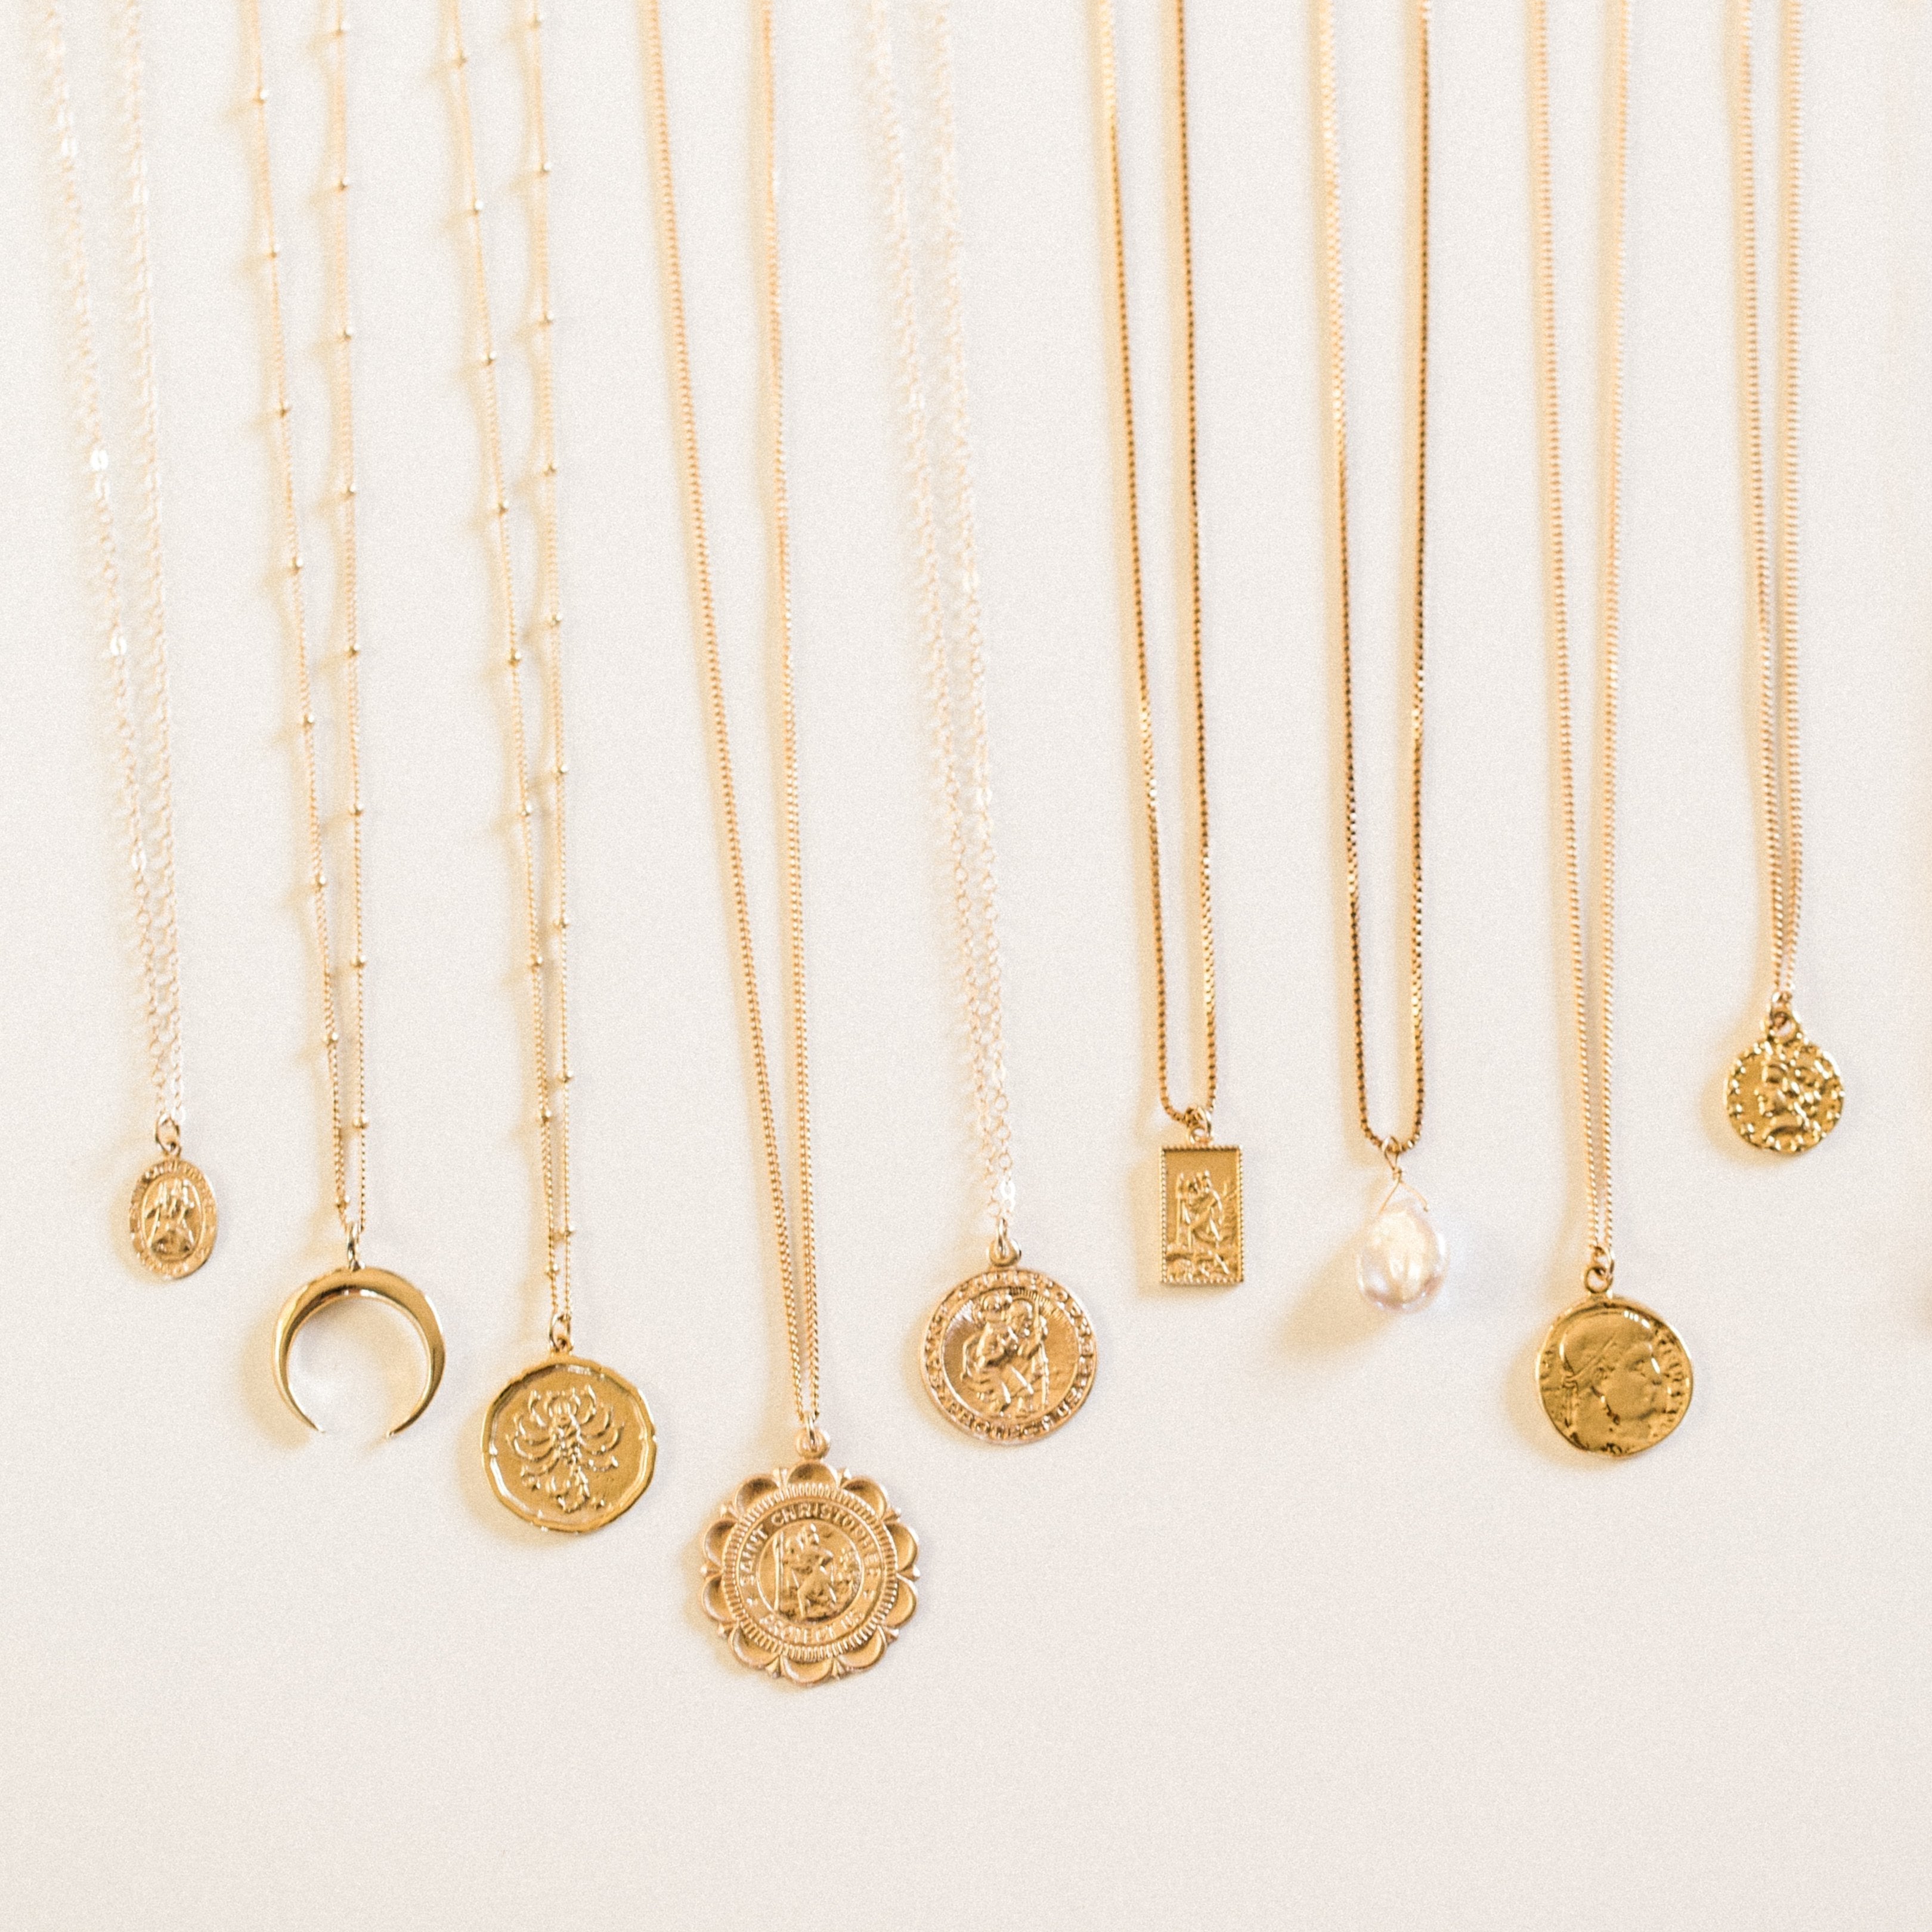 Best gold jewellery: 25 gold necklaces, bracelets and earrings